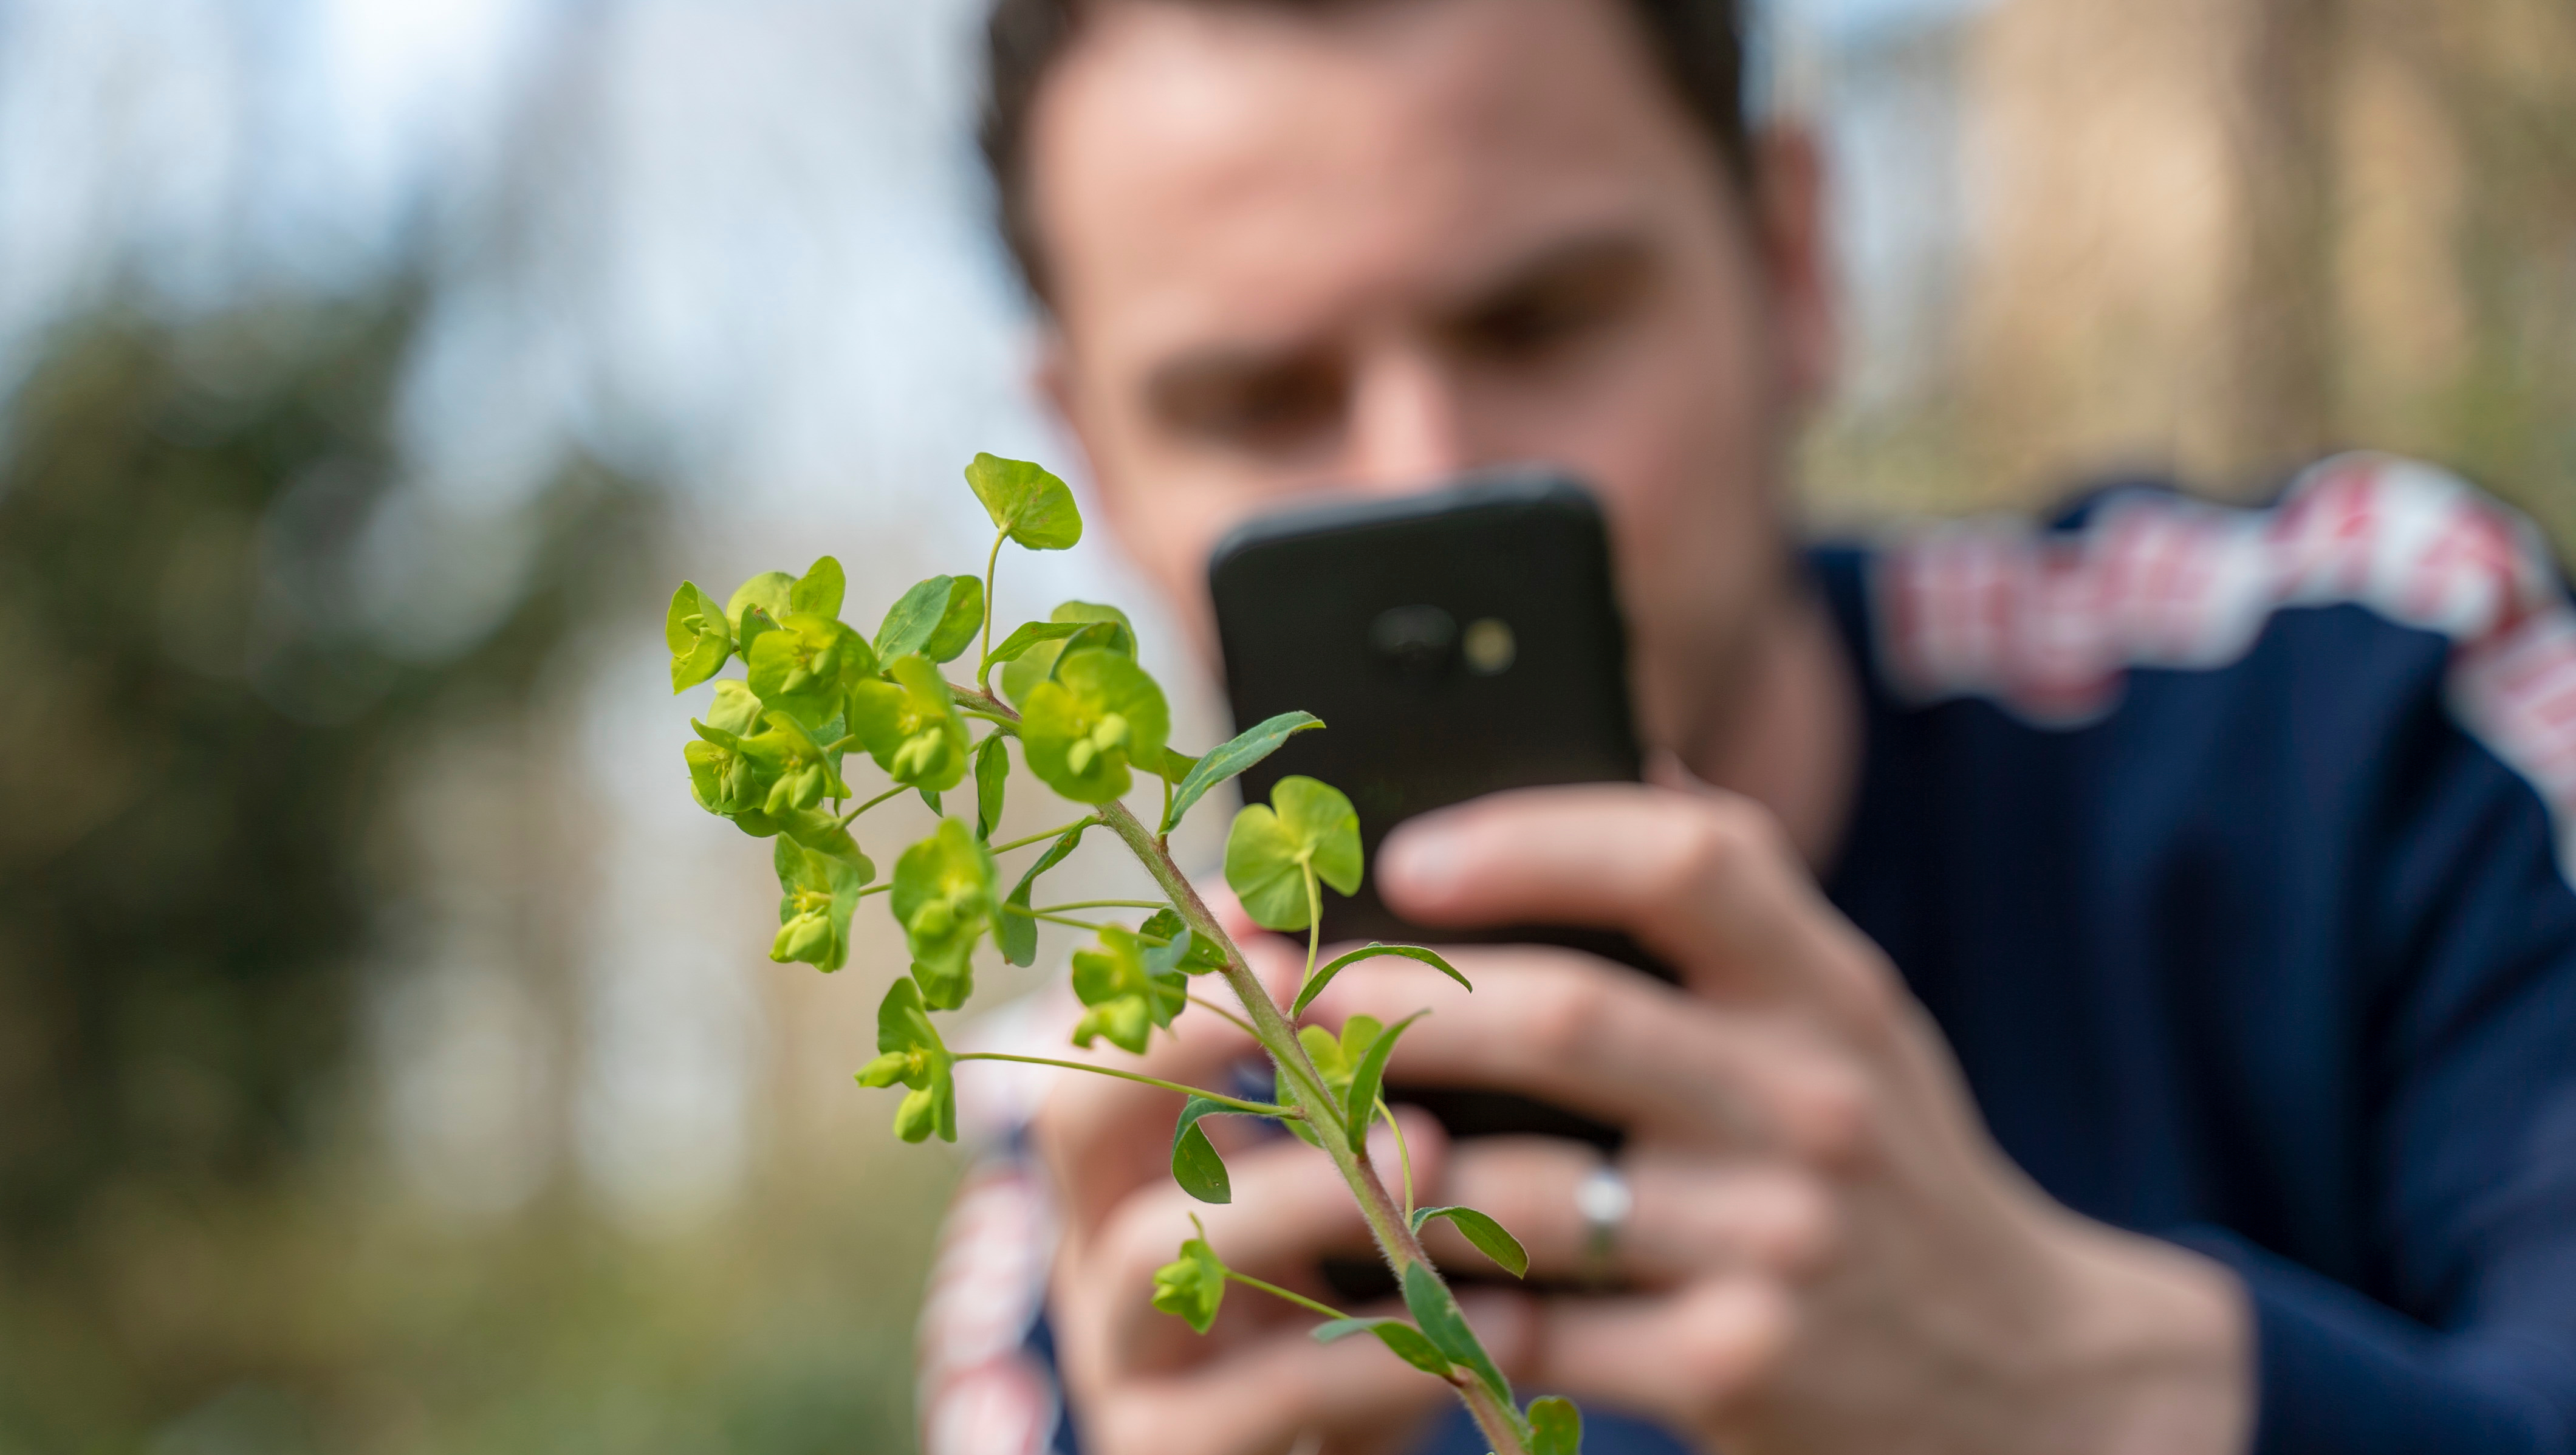 An out of focus man in the background holding a phone and taking a photo of an in focus plant in the foreground.